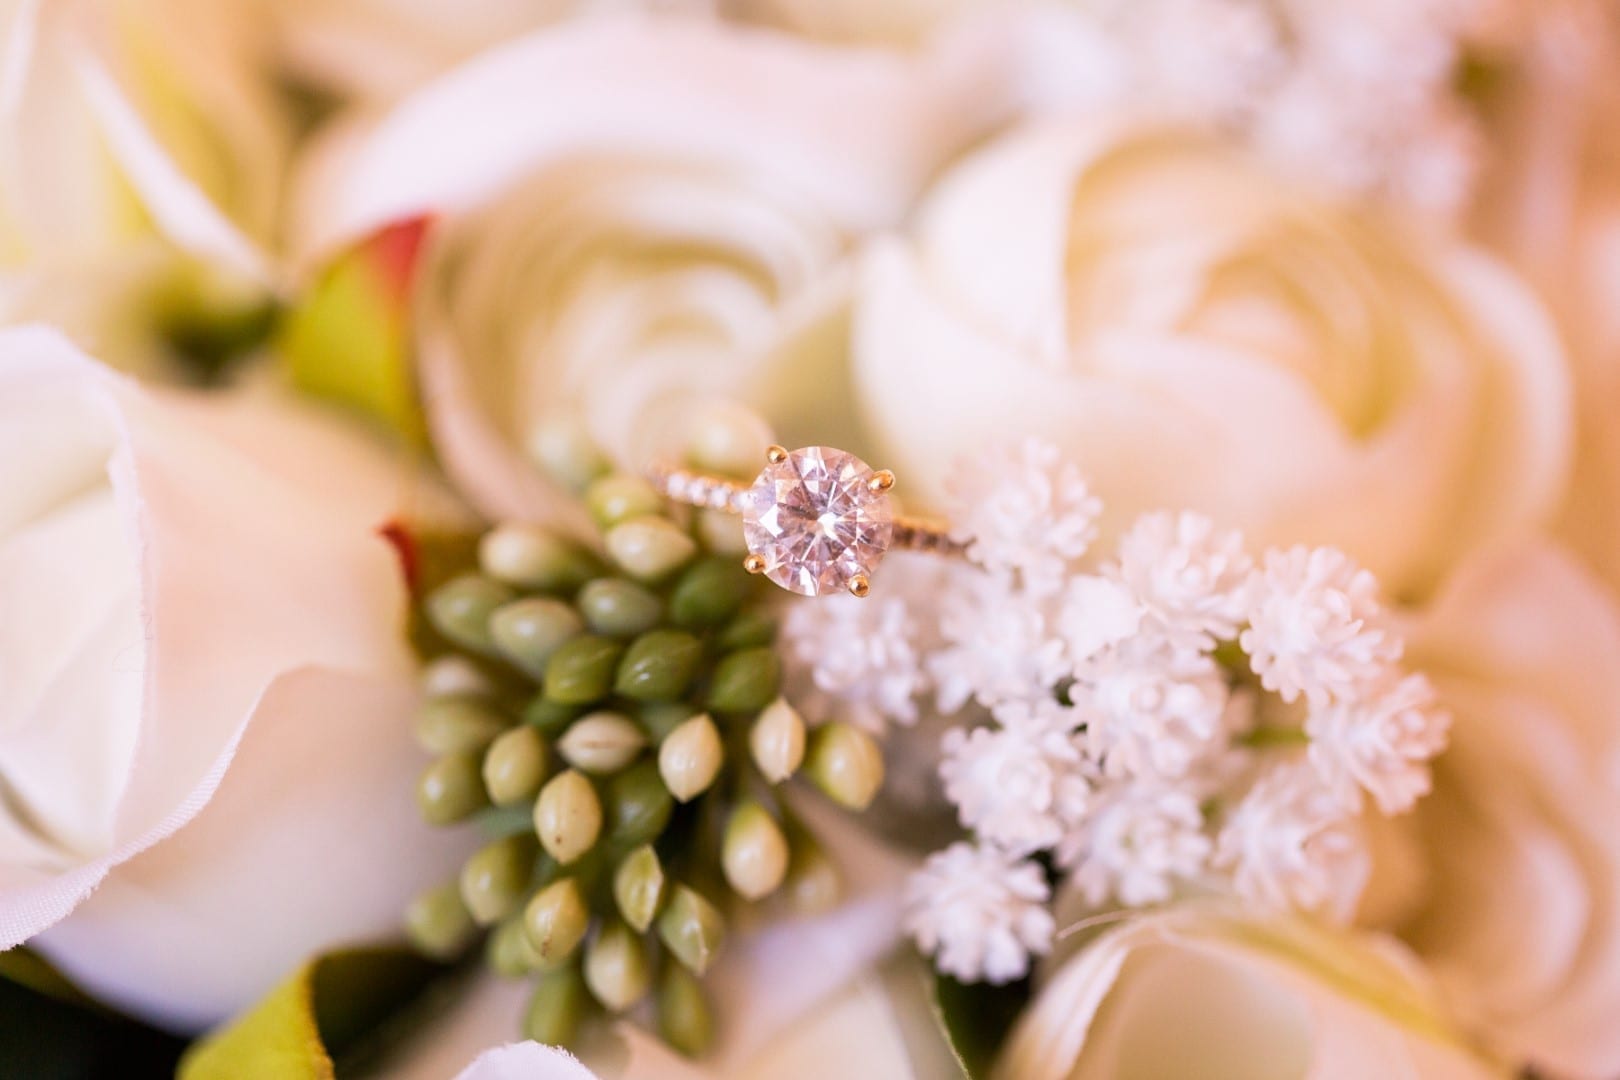 Beautiful engagement ring sat on bouquet. 